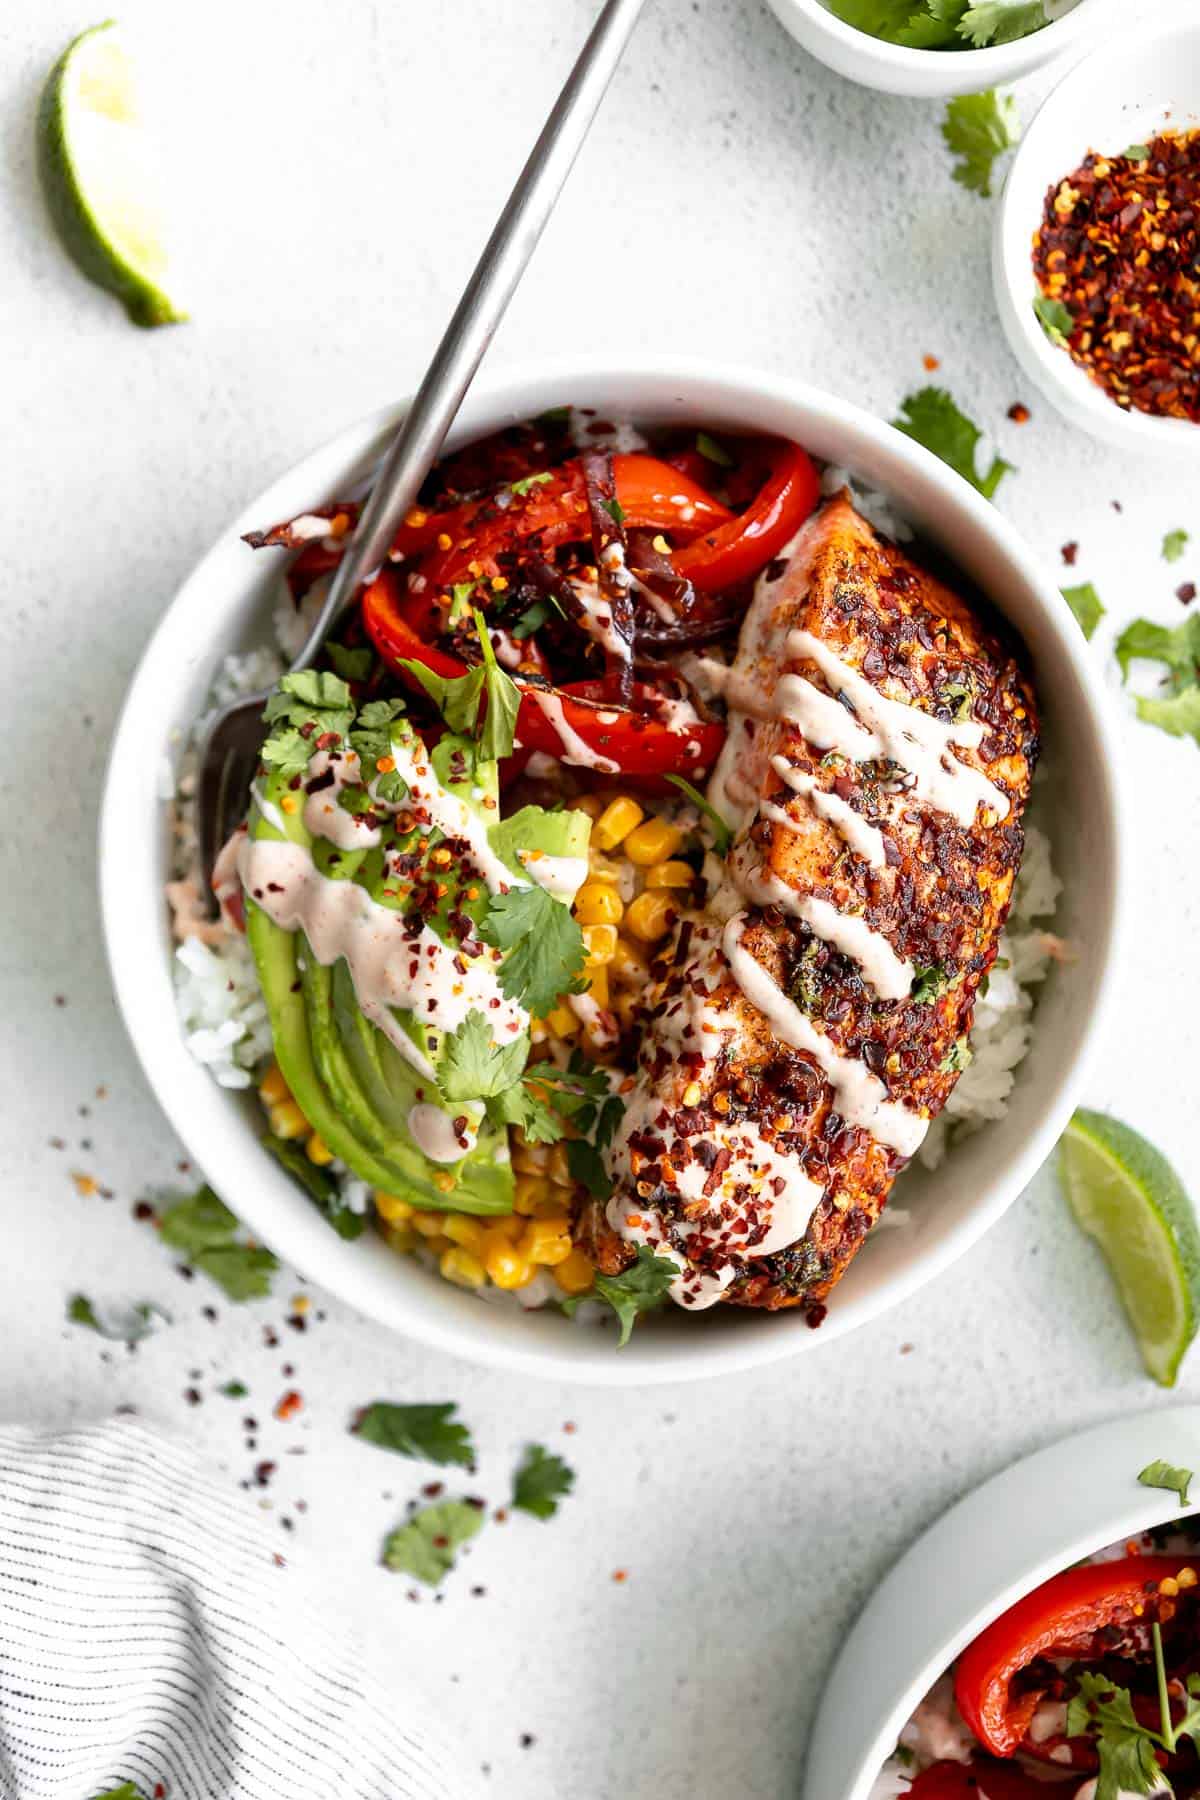 two baked salmon burrito bowls with corn, roasted veggies and avocado